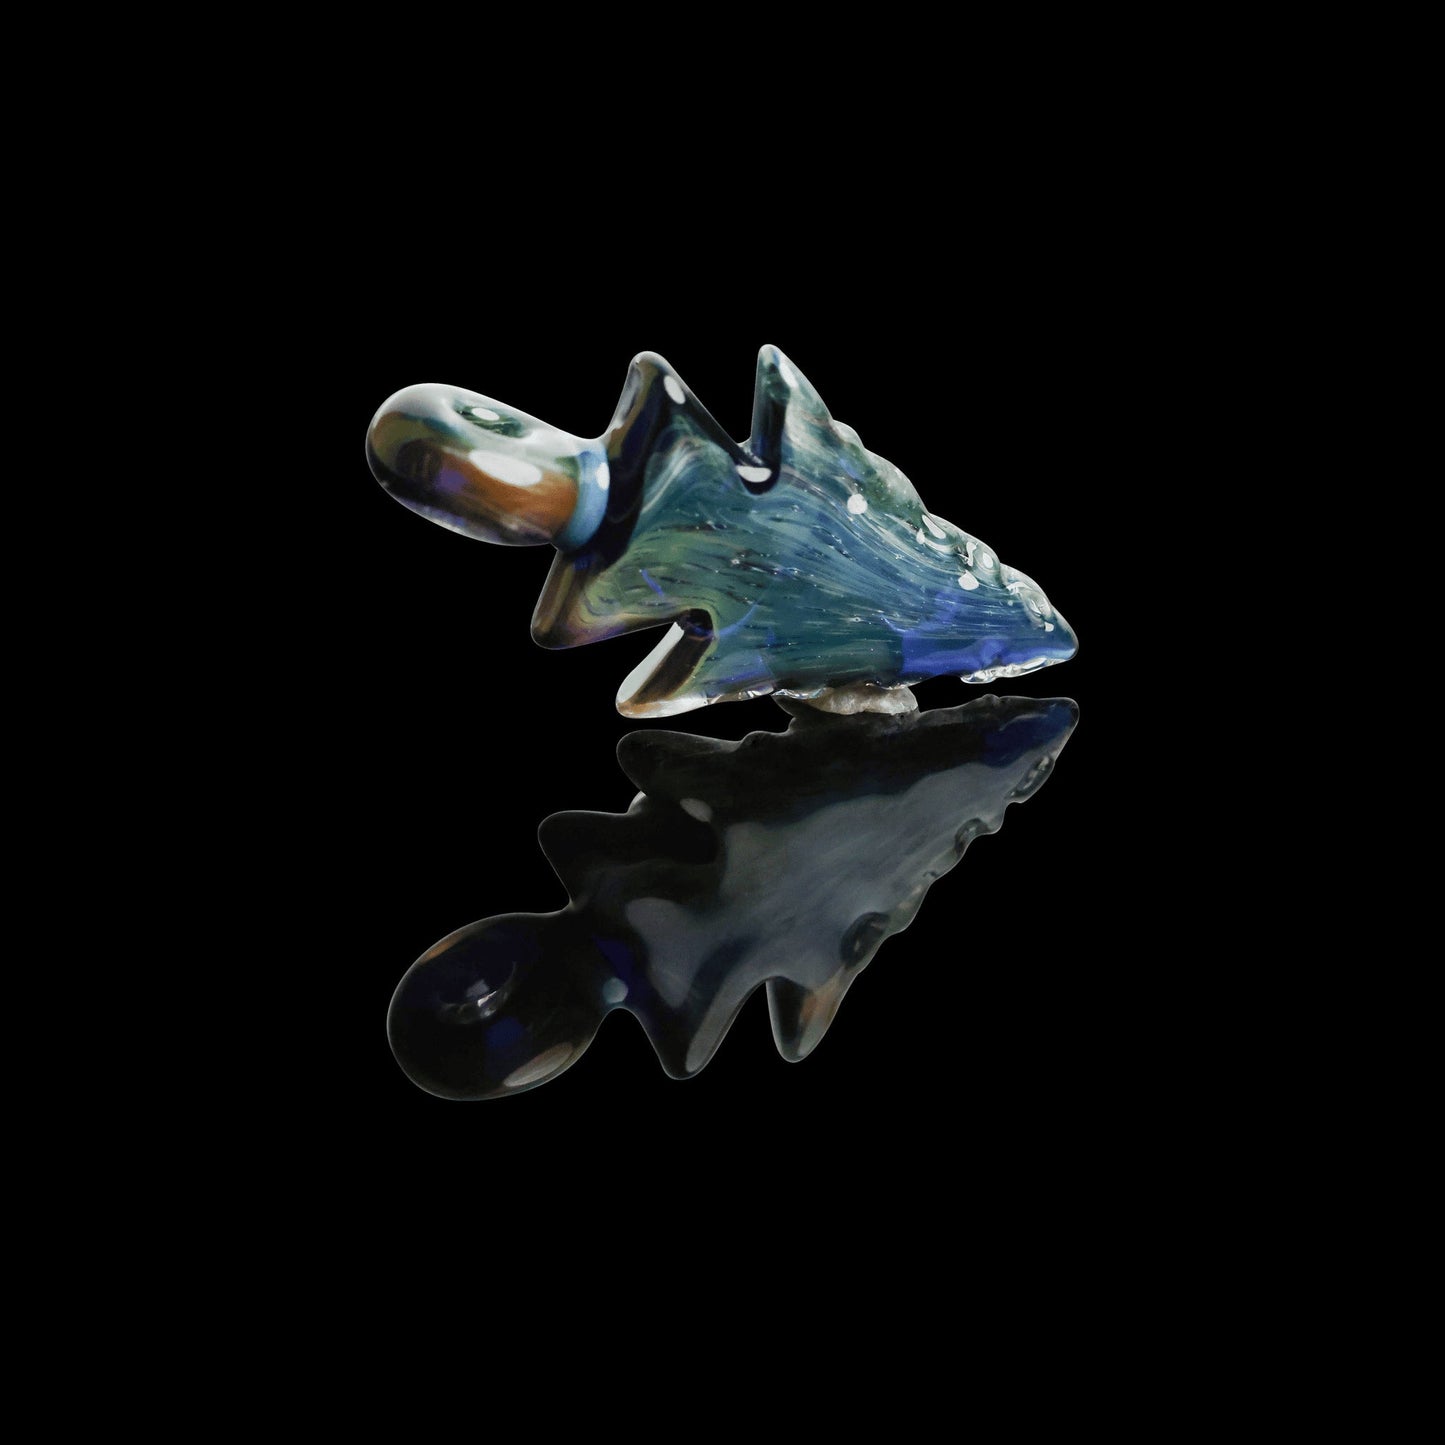 exquisite glass pendant - Arrowhead Collab Pendant (A) by Nathan (N8) Miers x ElksThatRun (2022 Drop)